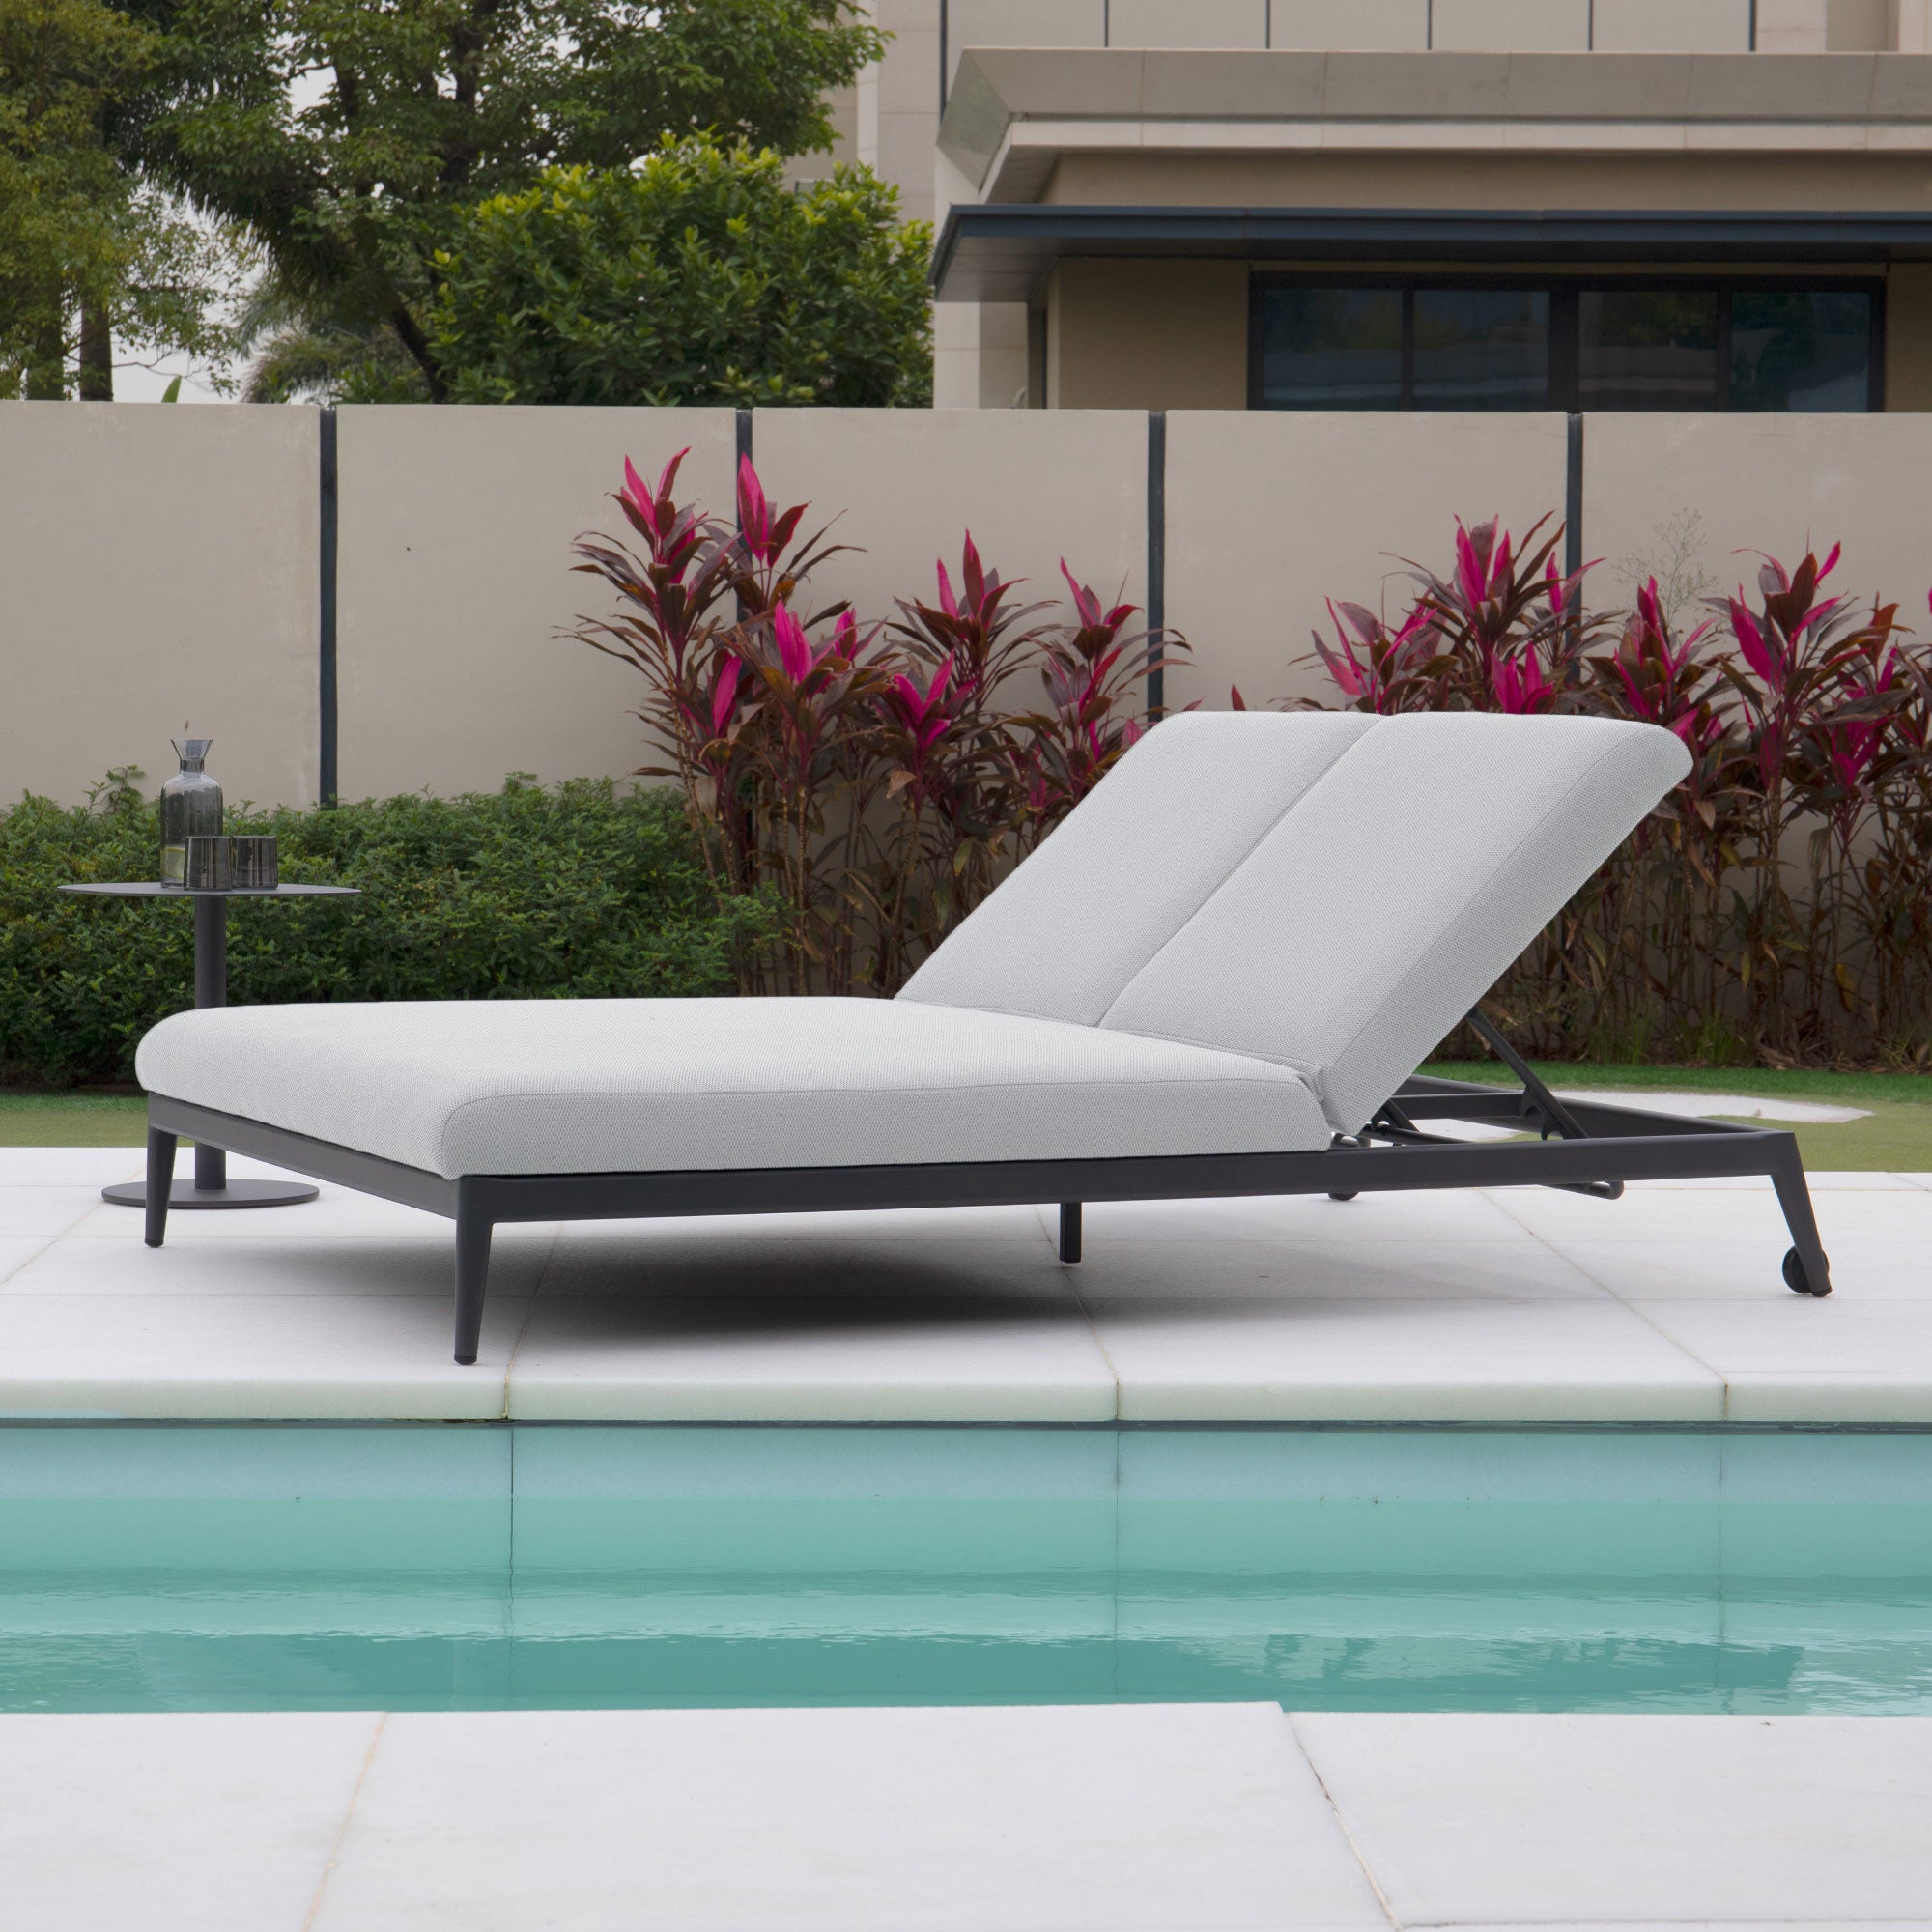 Luna Outdoor Fabric Double Sun Lounger in Oyster Grey